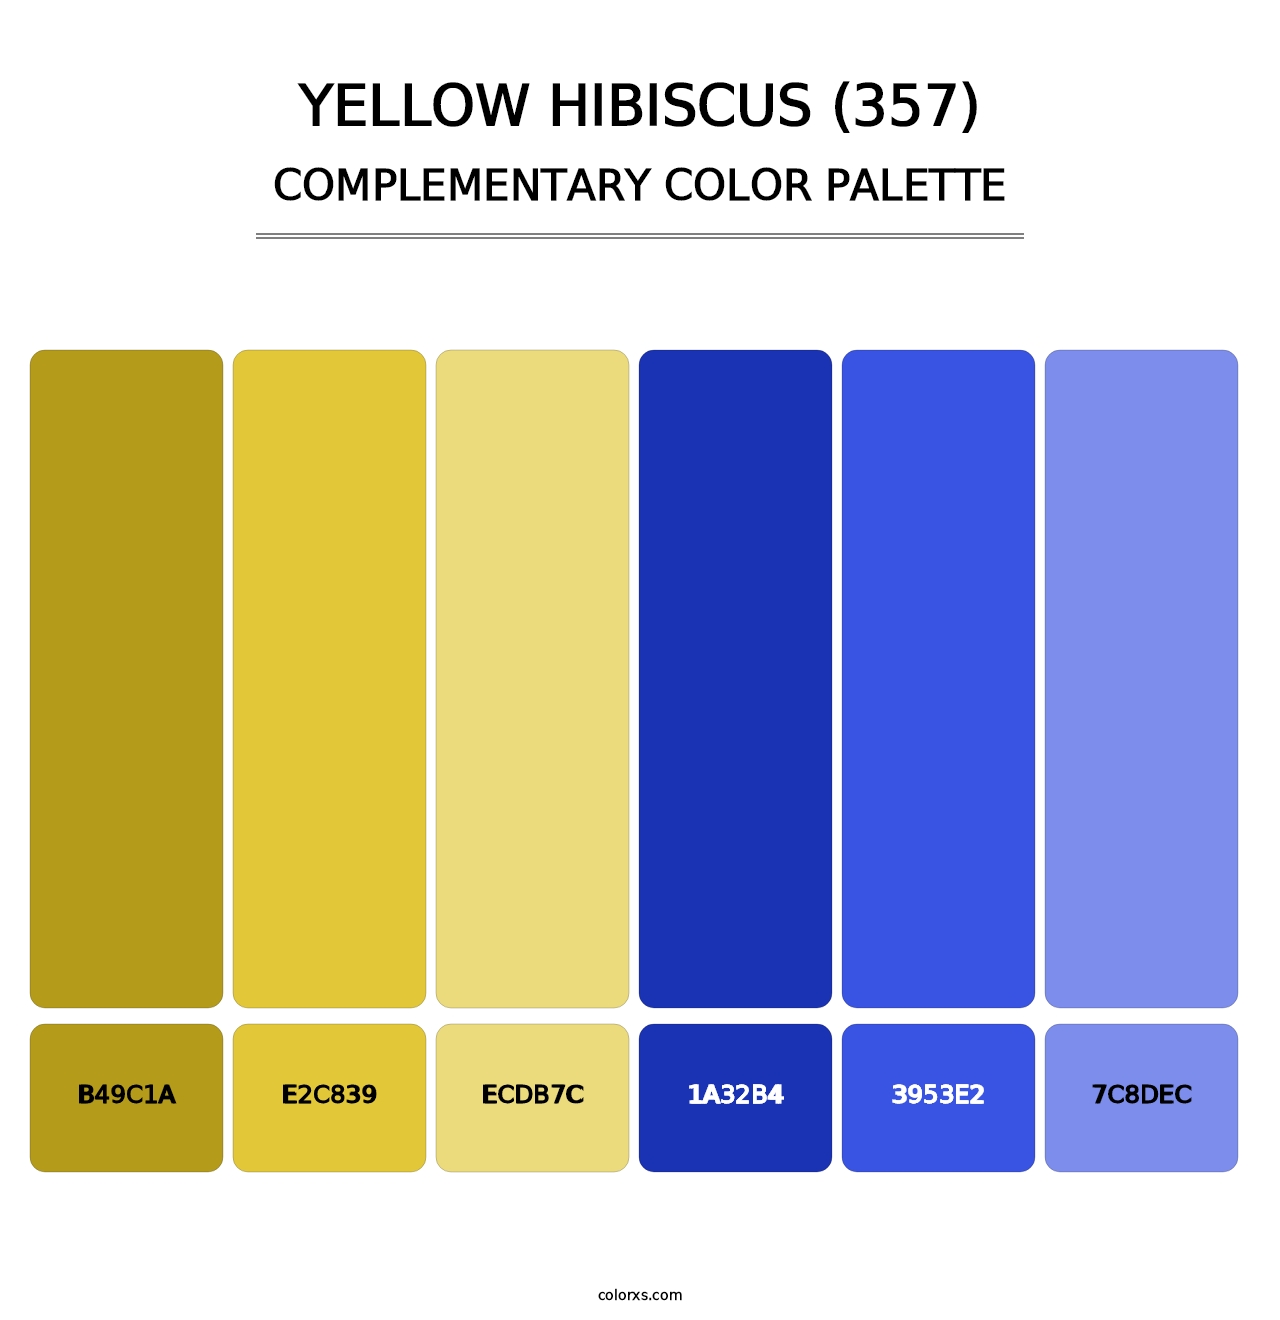 Yellow Hibiscus (357) - Complementary Color Palette